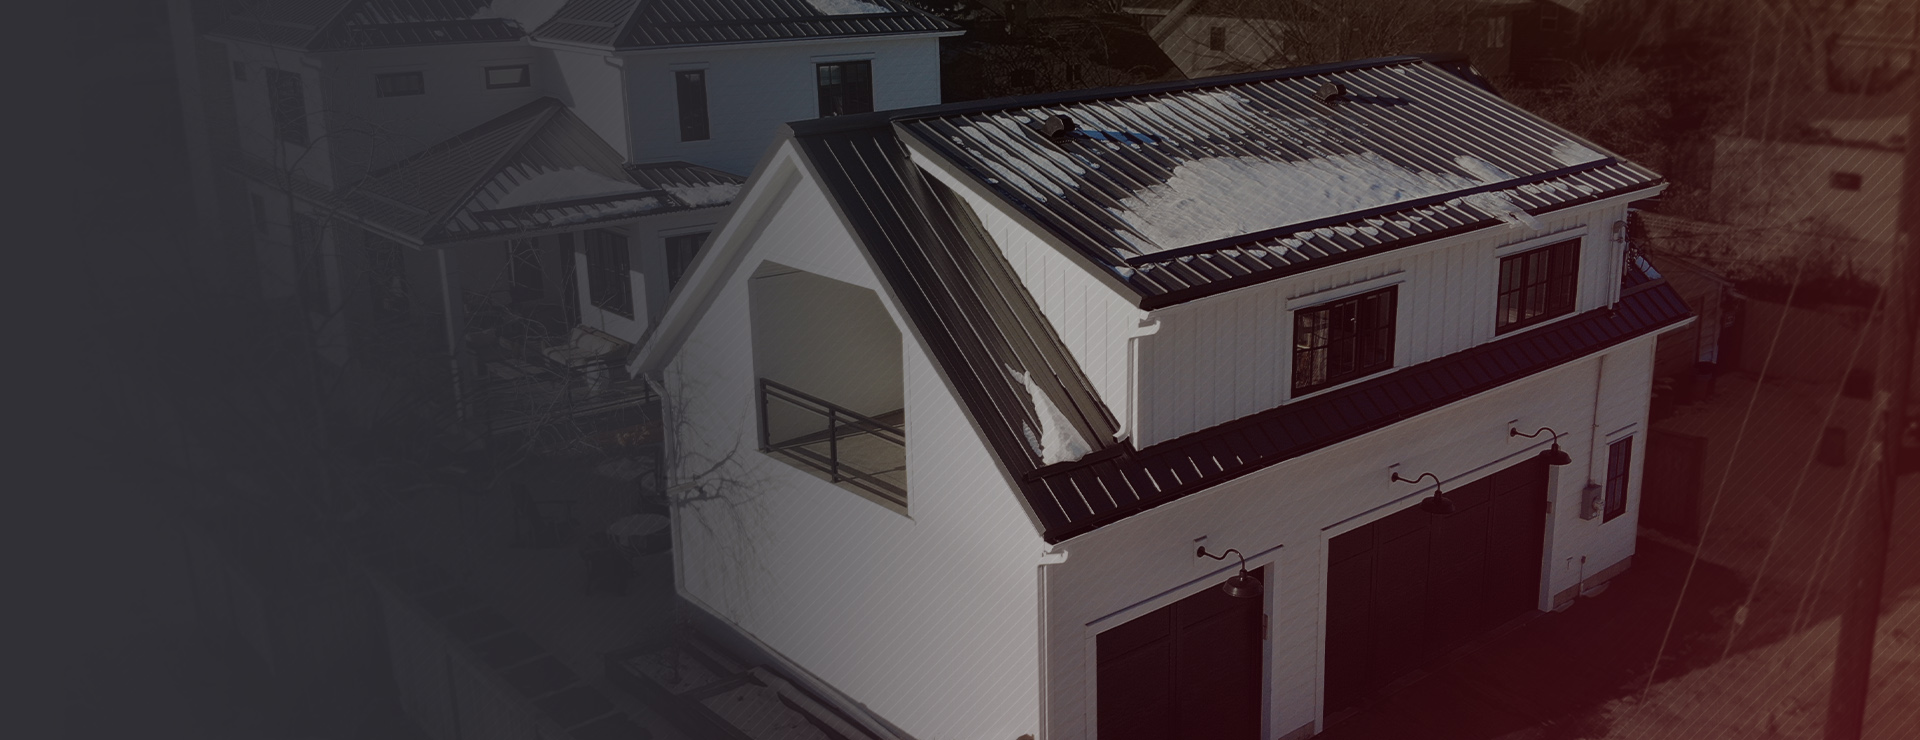 Kelowna metal roofing projects in BC